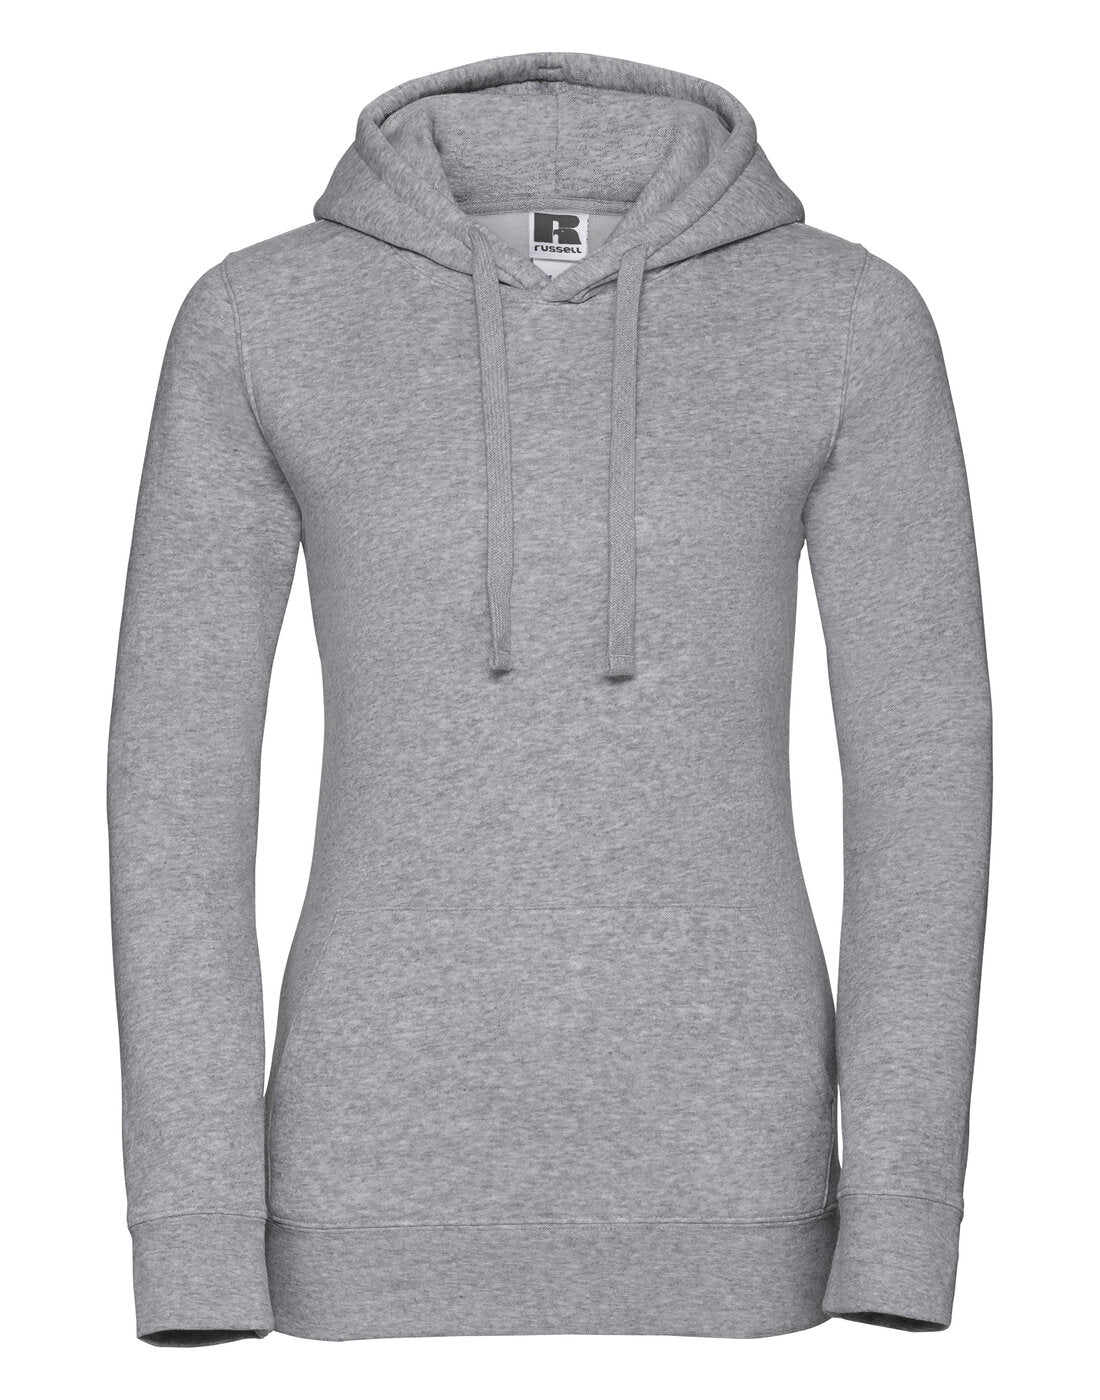 Russell Ladies Authentic Hoodie Light Oxford